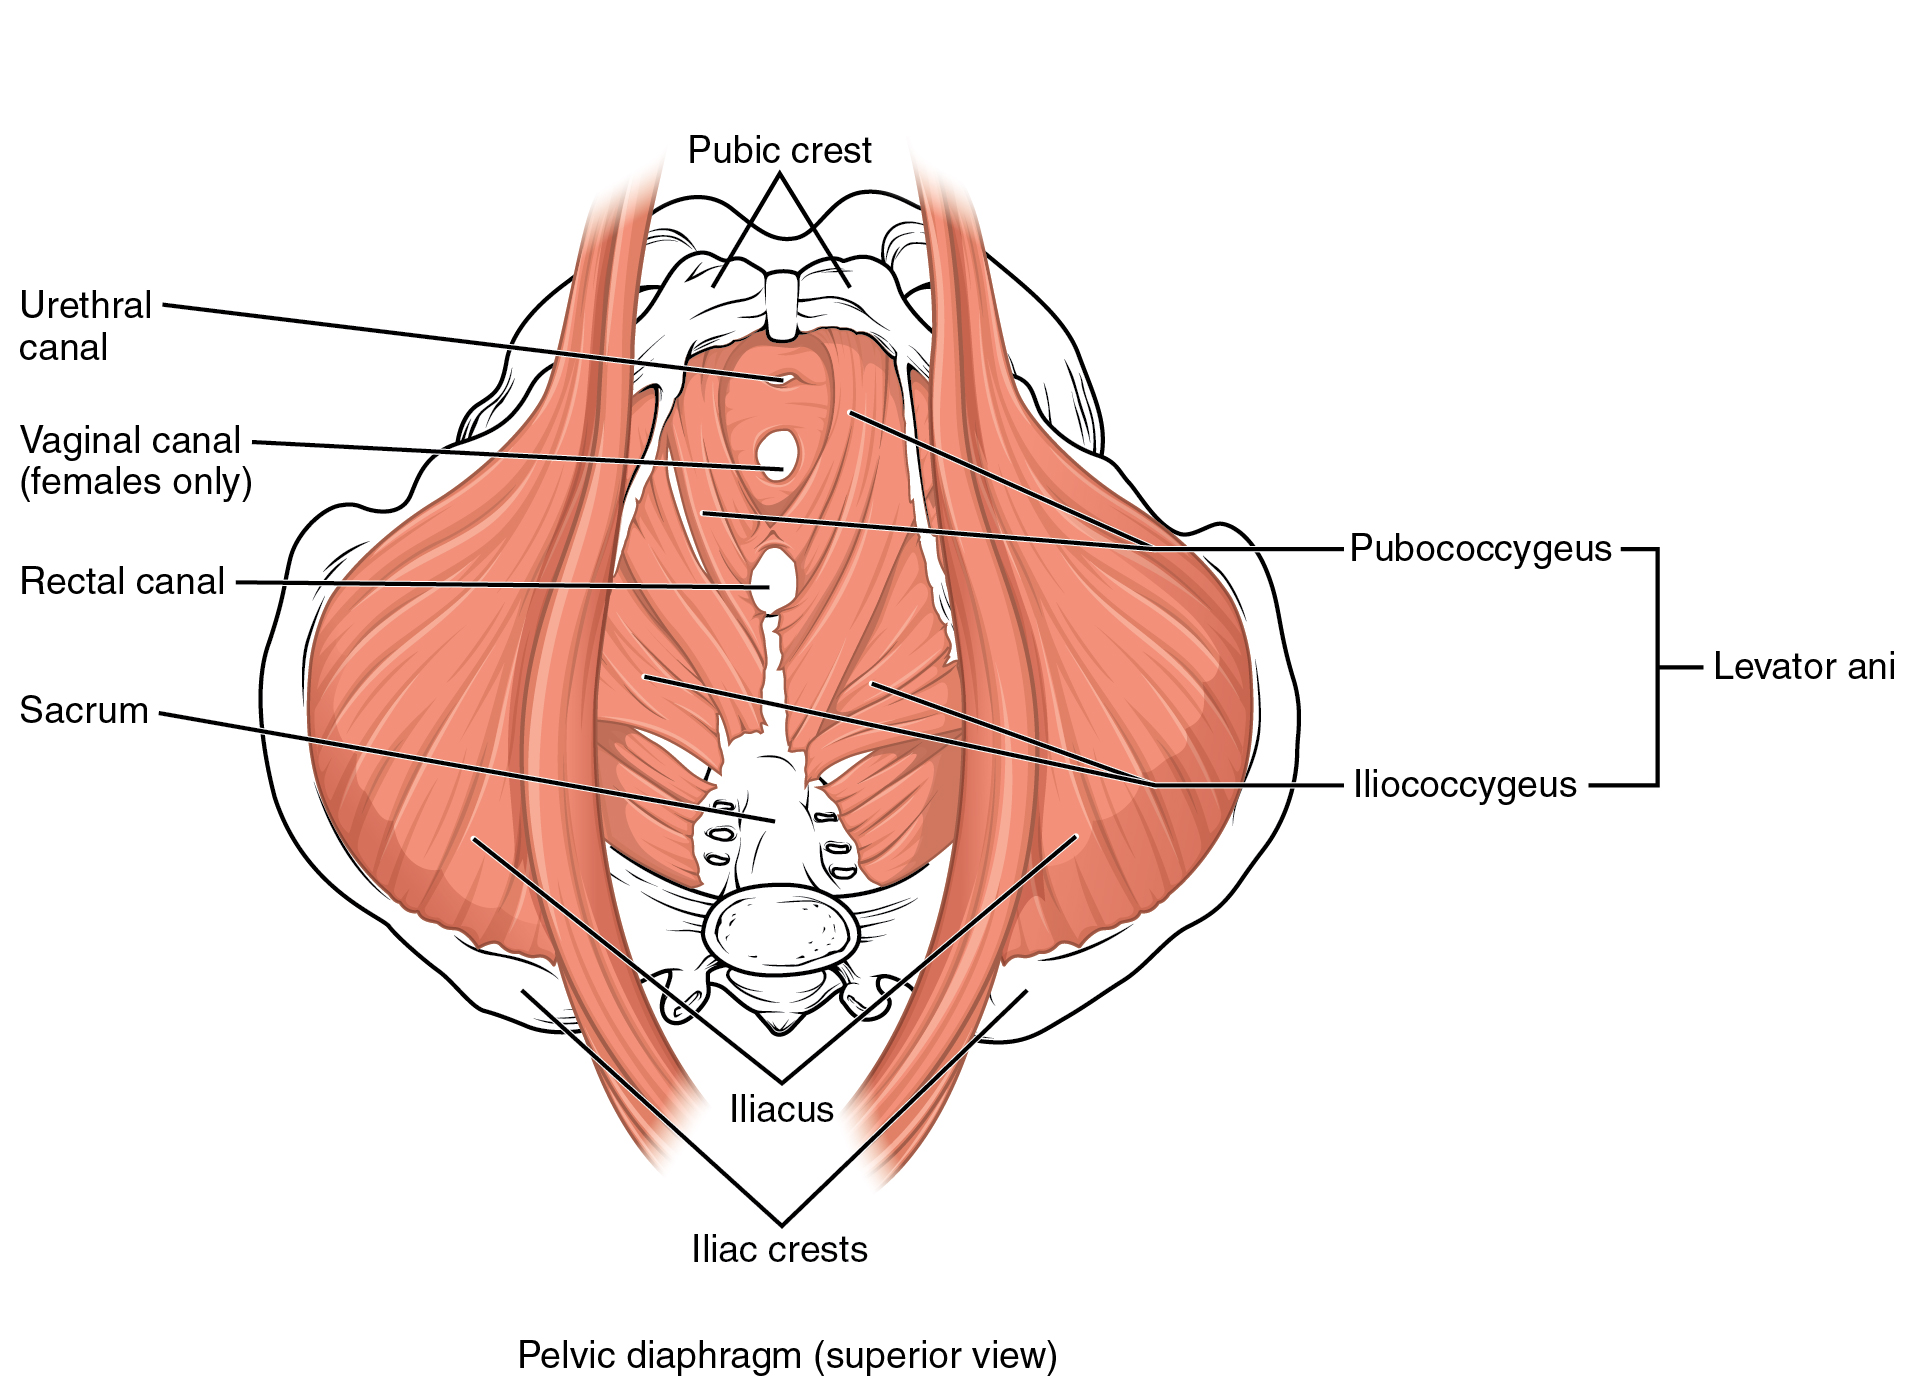 Appendicular Muscles of the Pelvic Girdle and Lower Limbs